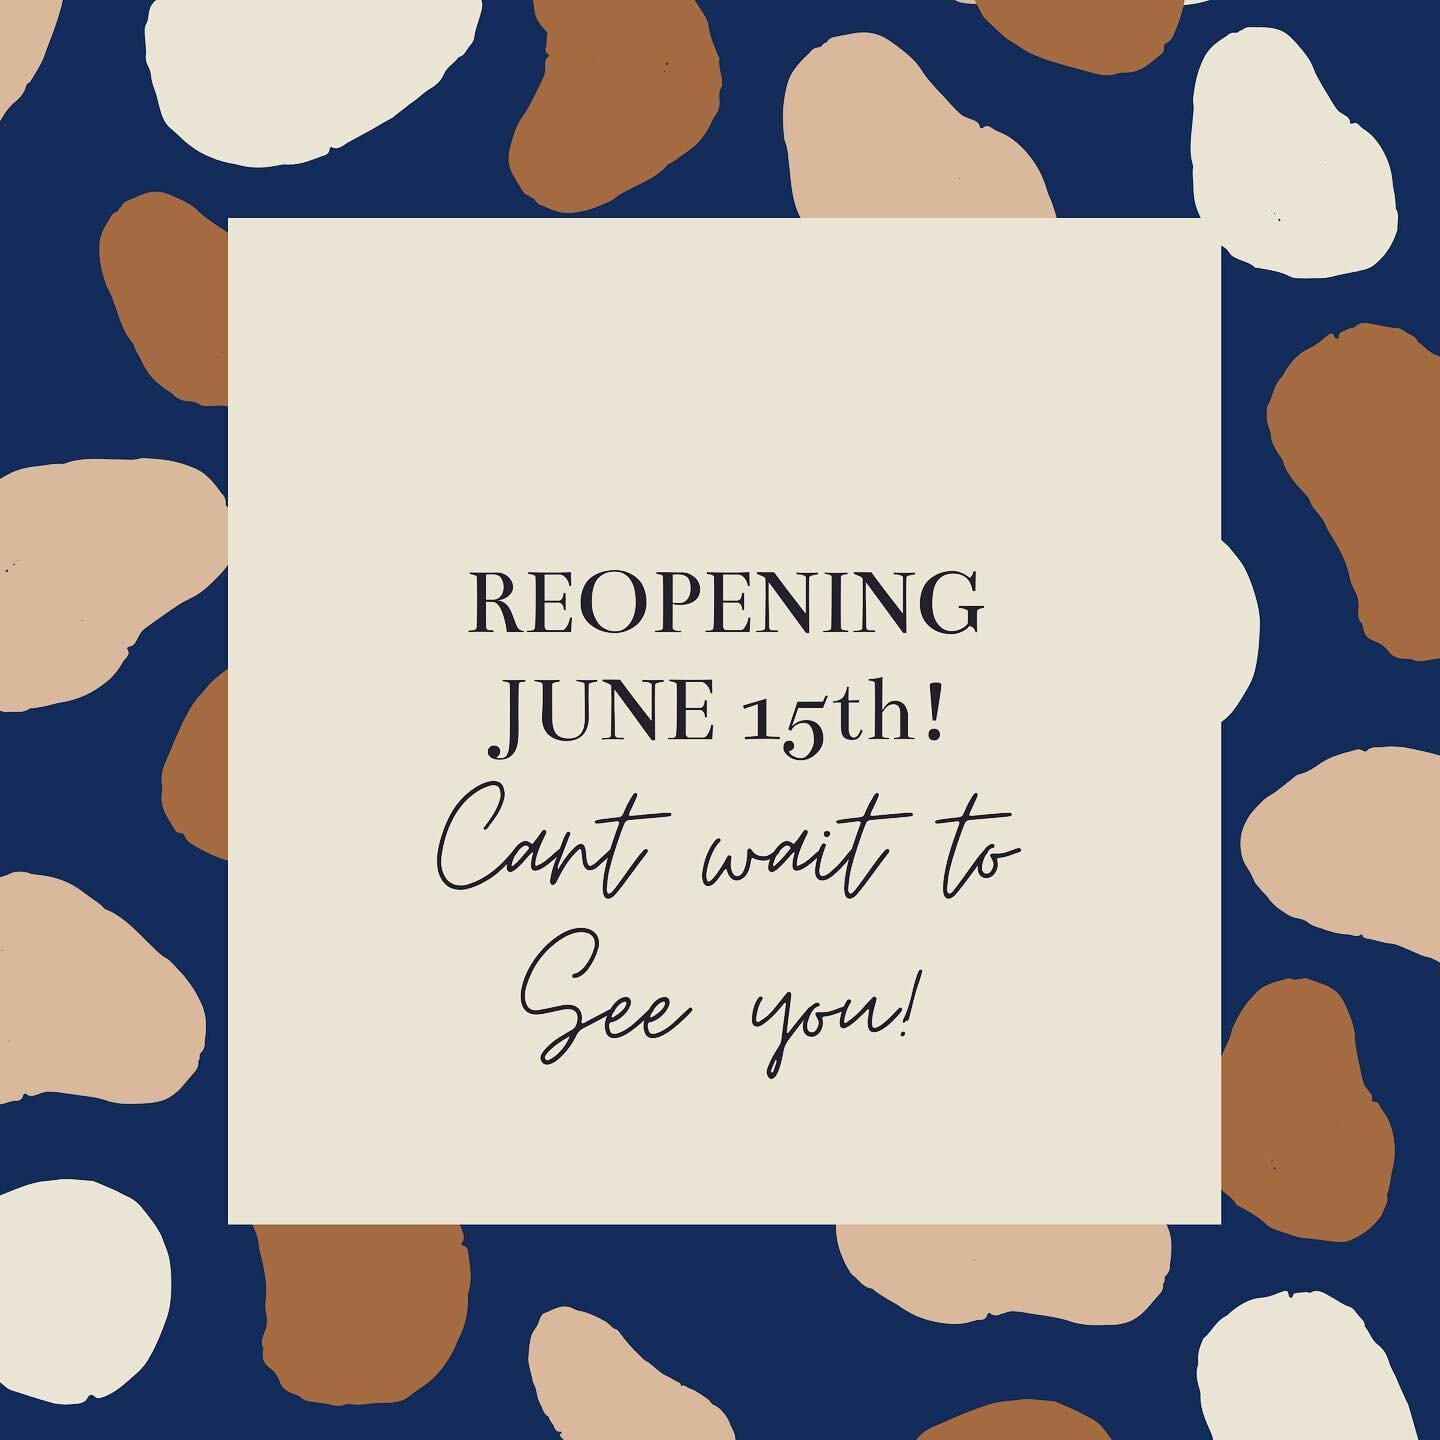 We received exciting news today, we will be reopening on June 15th!
Your next appointment is a high priority for us. Our scheduling method for reopening is to contact all clients personally in a systematic order.  For clients who had appointments on 